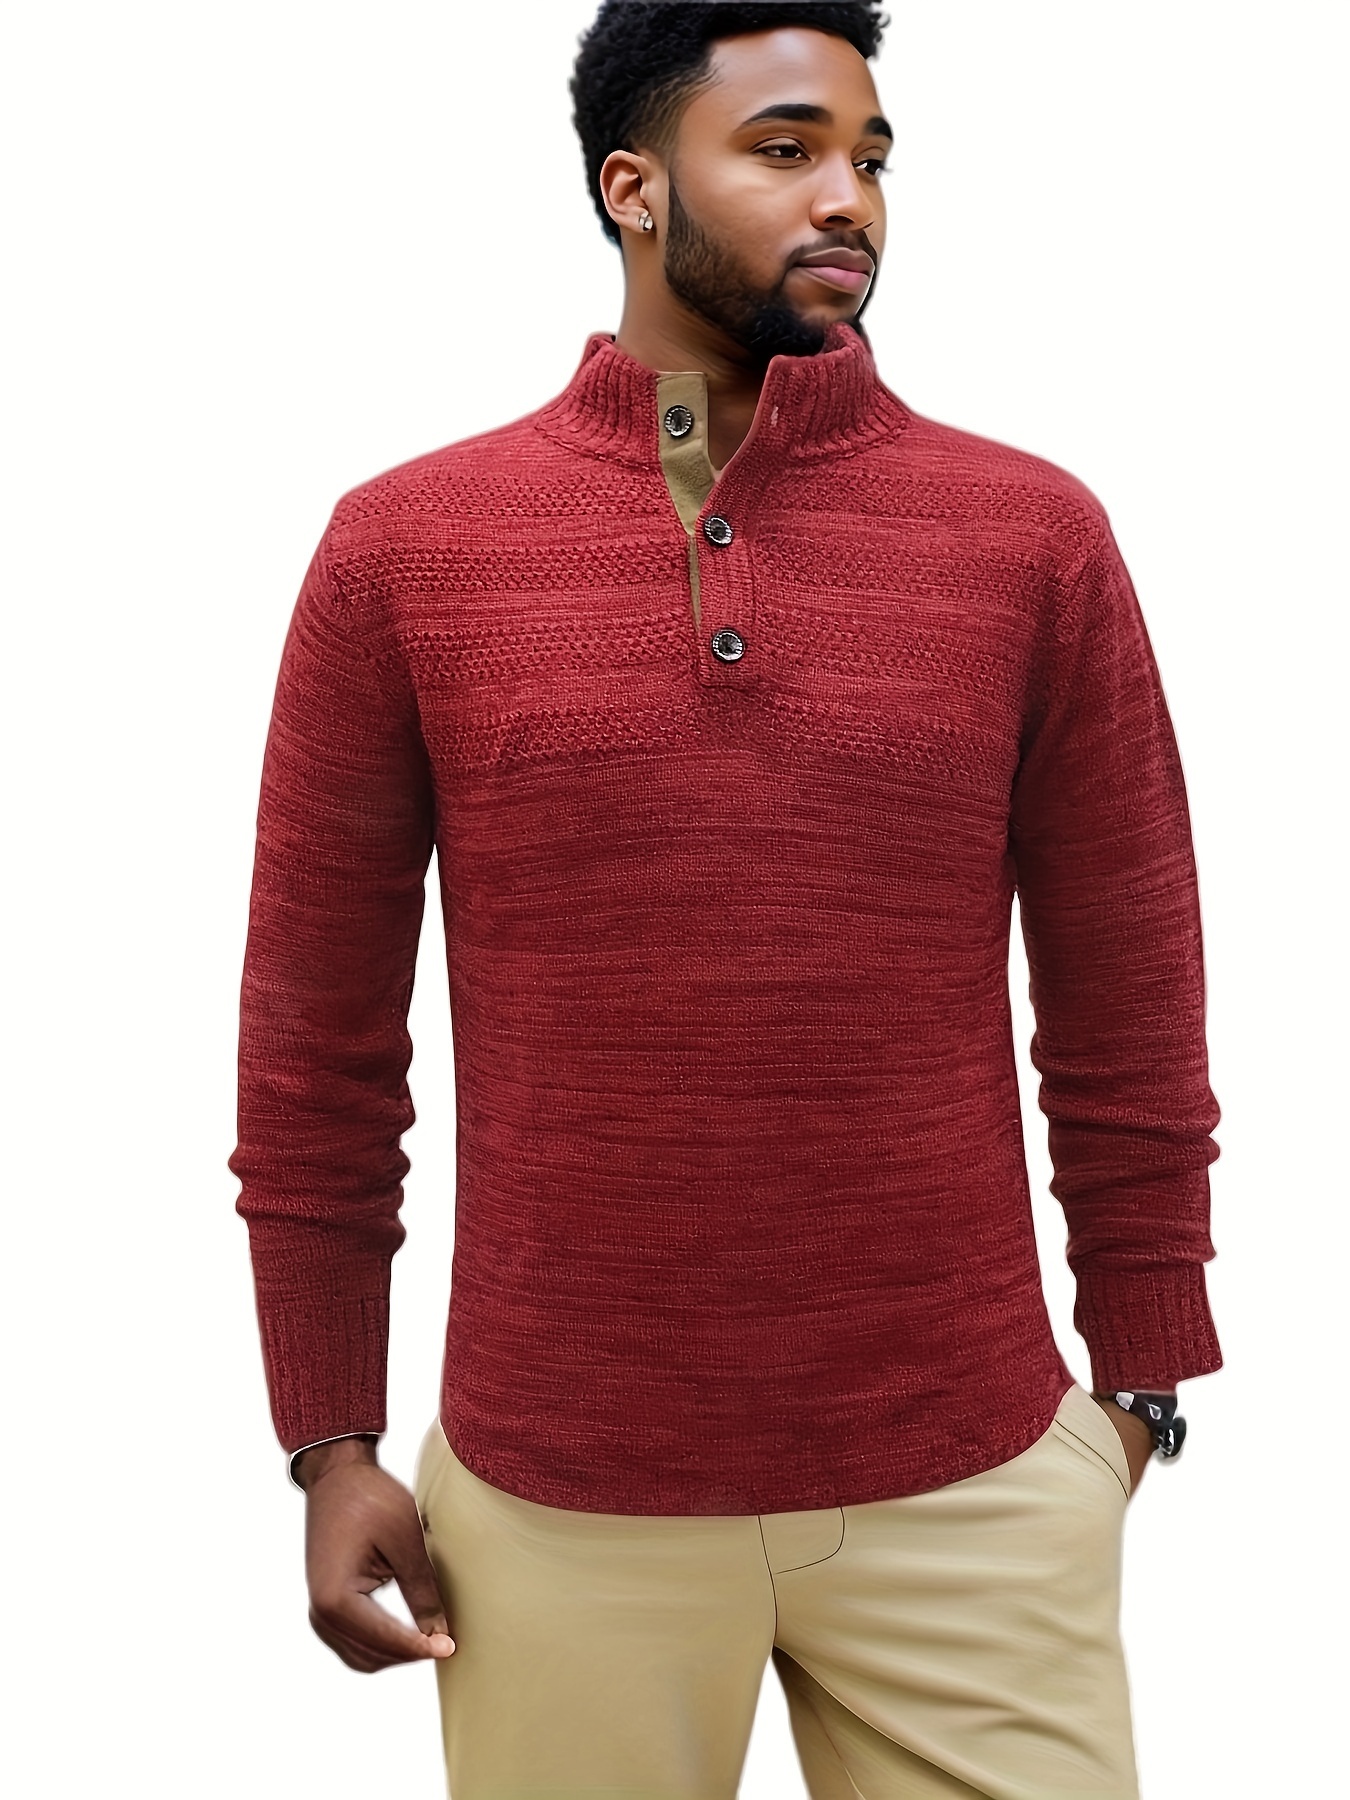 Solid Color Chic Knit Shirt, Men's Casual Lapel Slightly Stretch V-Neck  Pullover Sweater For Autumn Winter